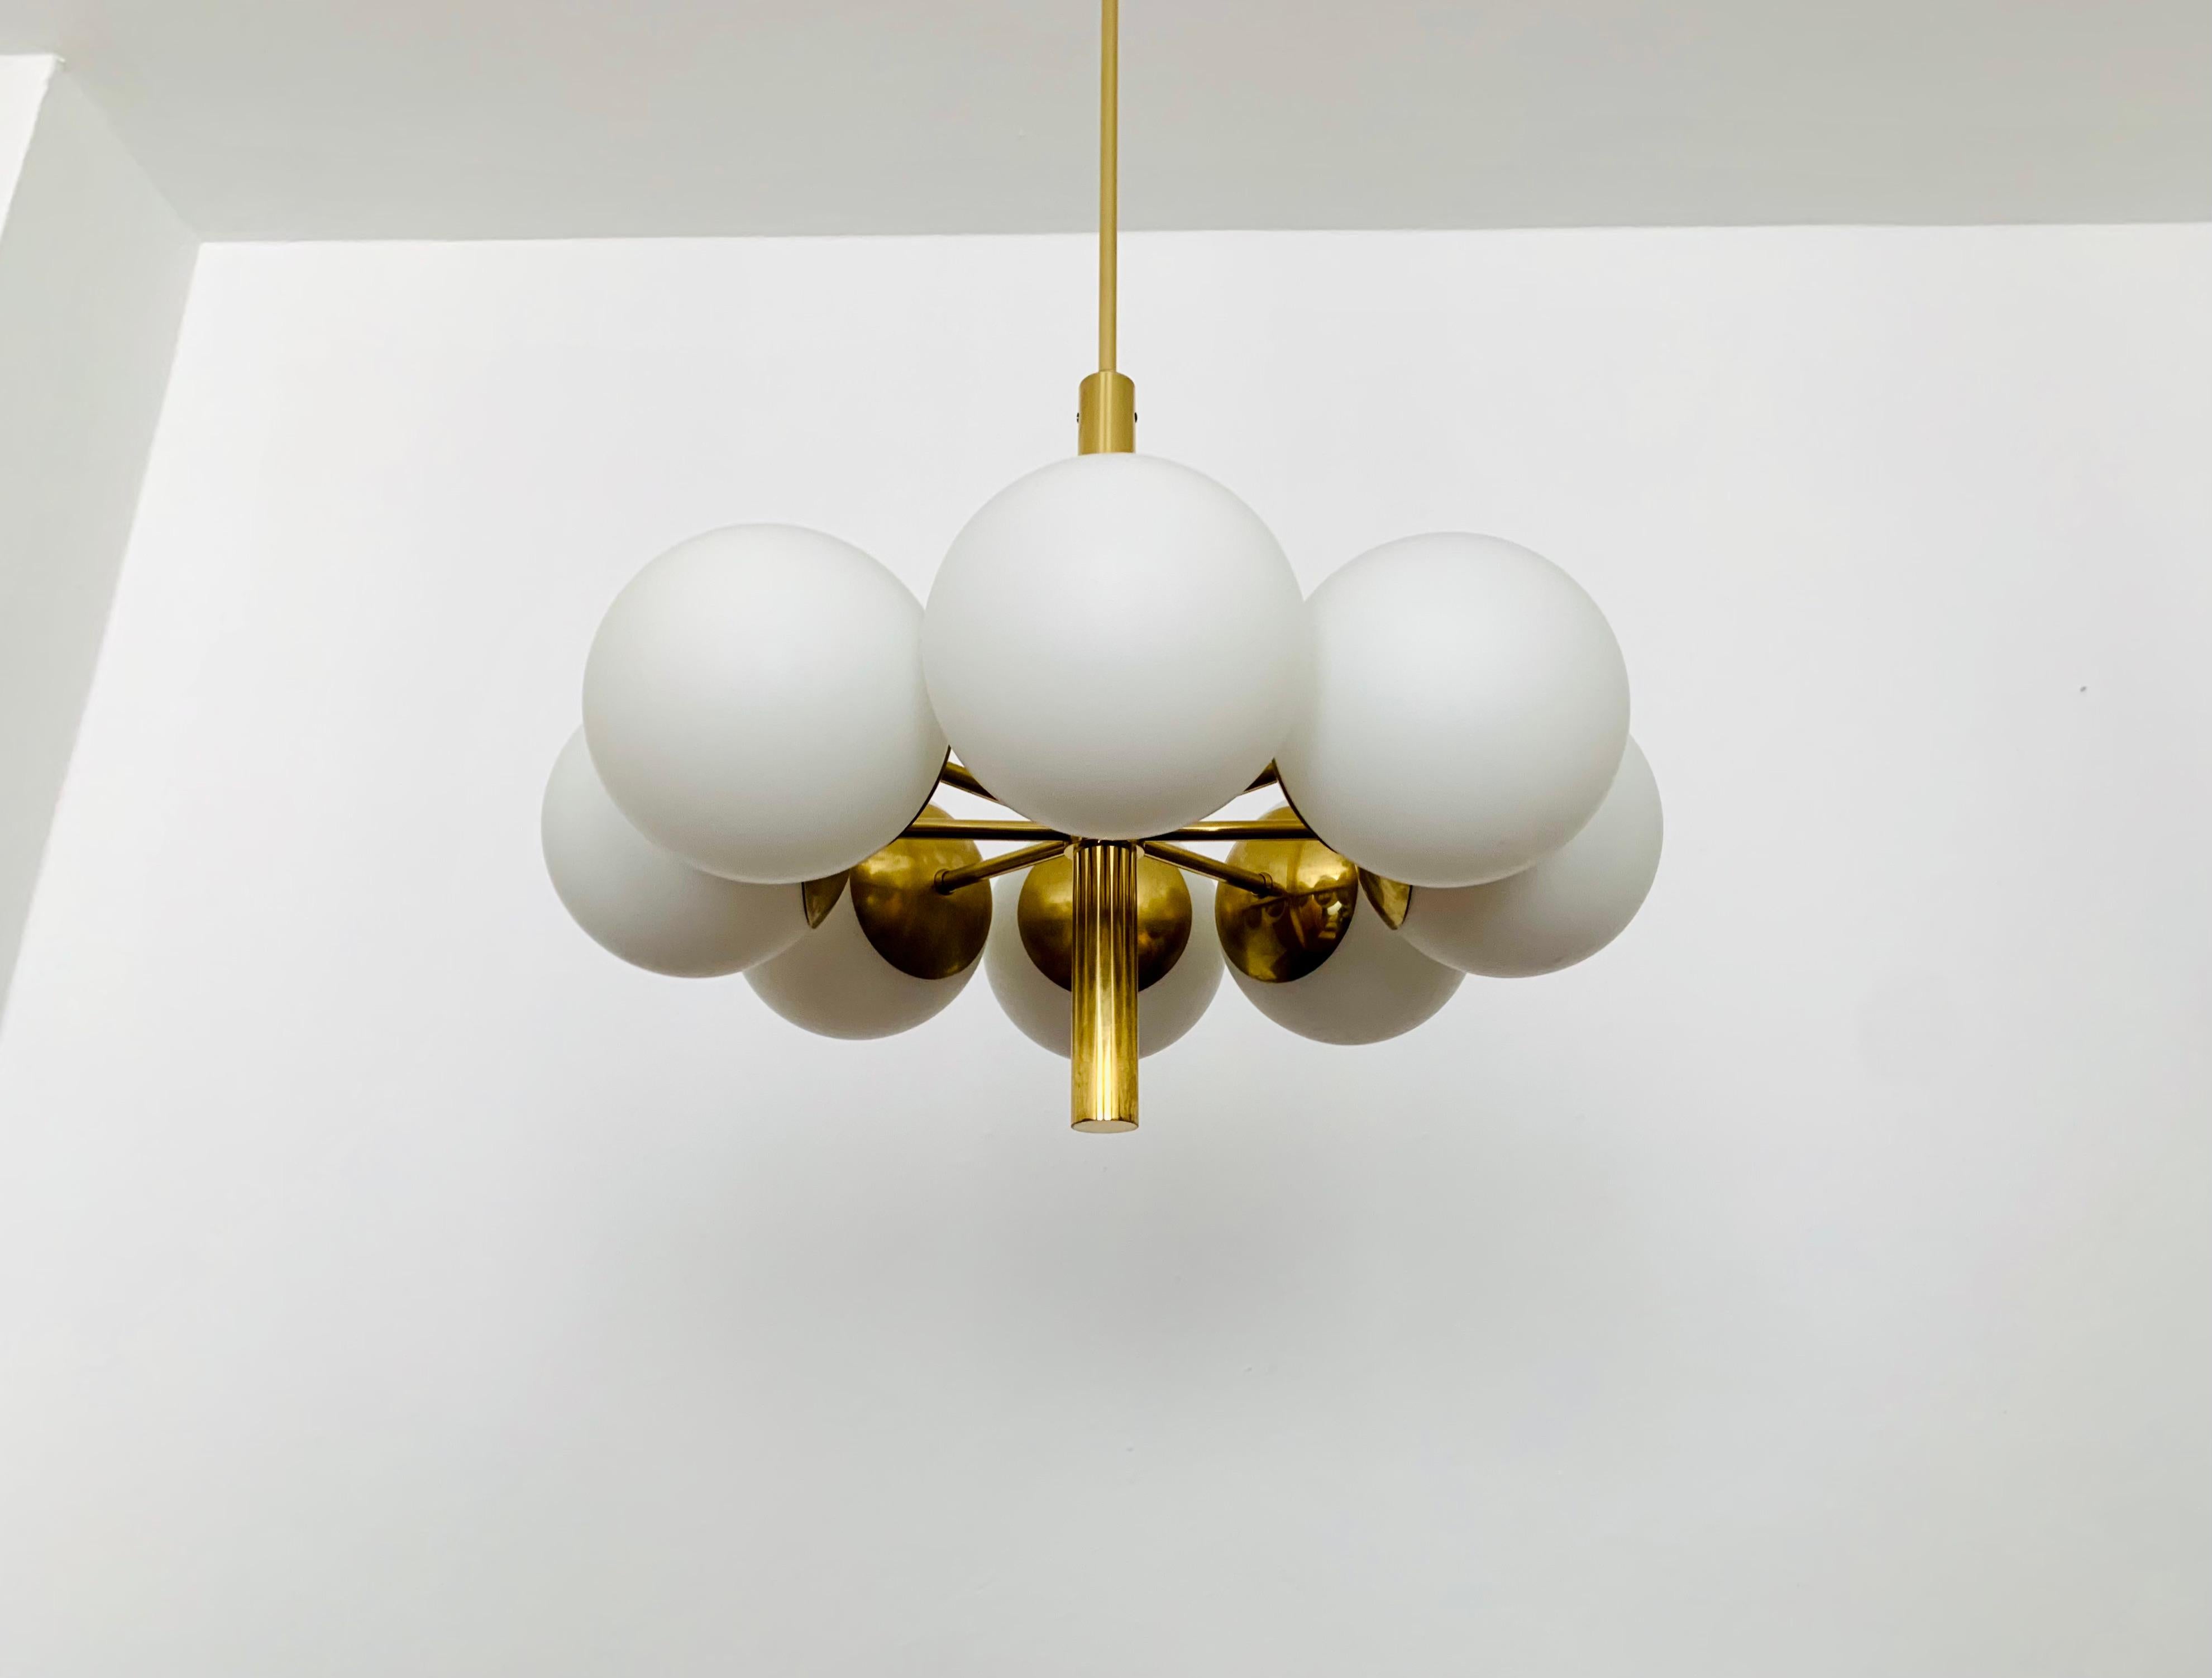 Wonderful golden Sputnik chandelier from the 1960s.
The opal glass lampshades spread a cozy light.
The lamp has a very high quality finish.
Very contemporary design with a fantastic look.

Manufacturer: Kaiser Leuchten

Condition:

Very good vintage